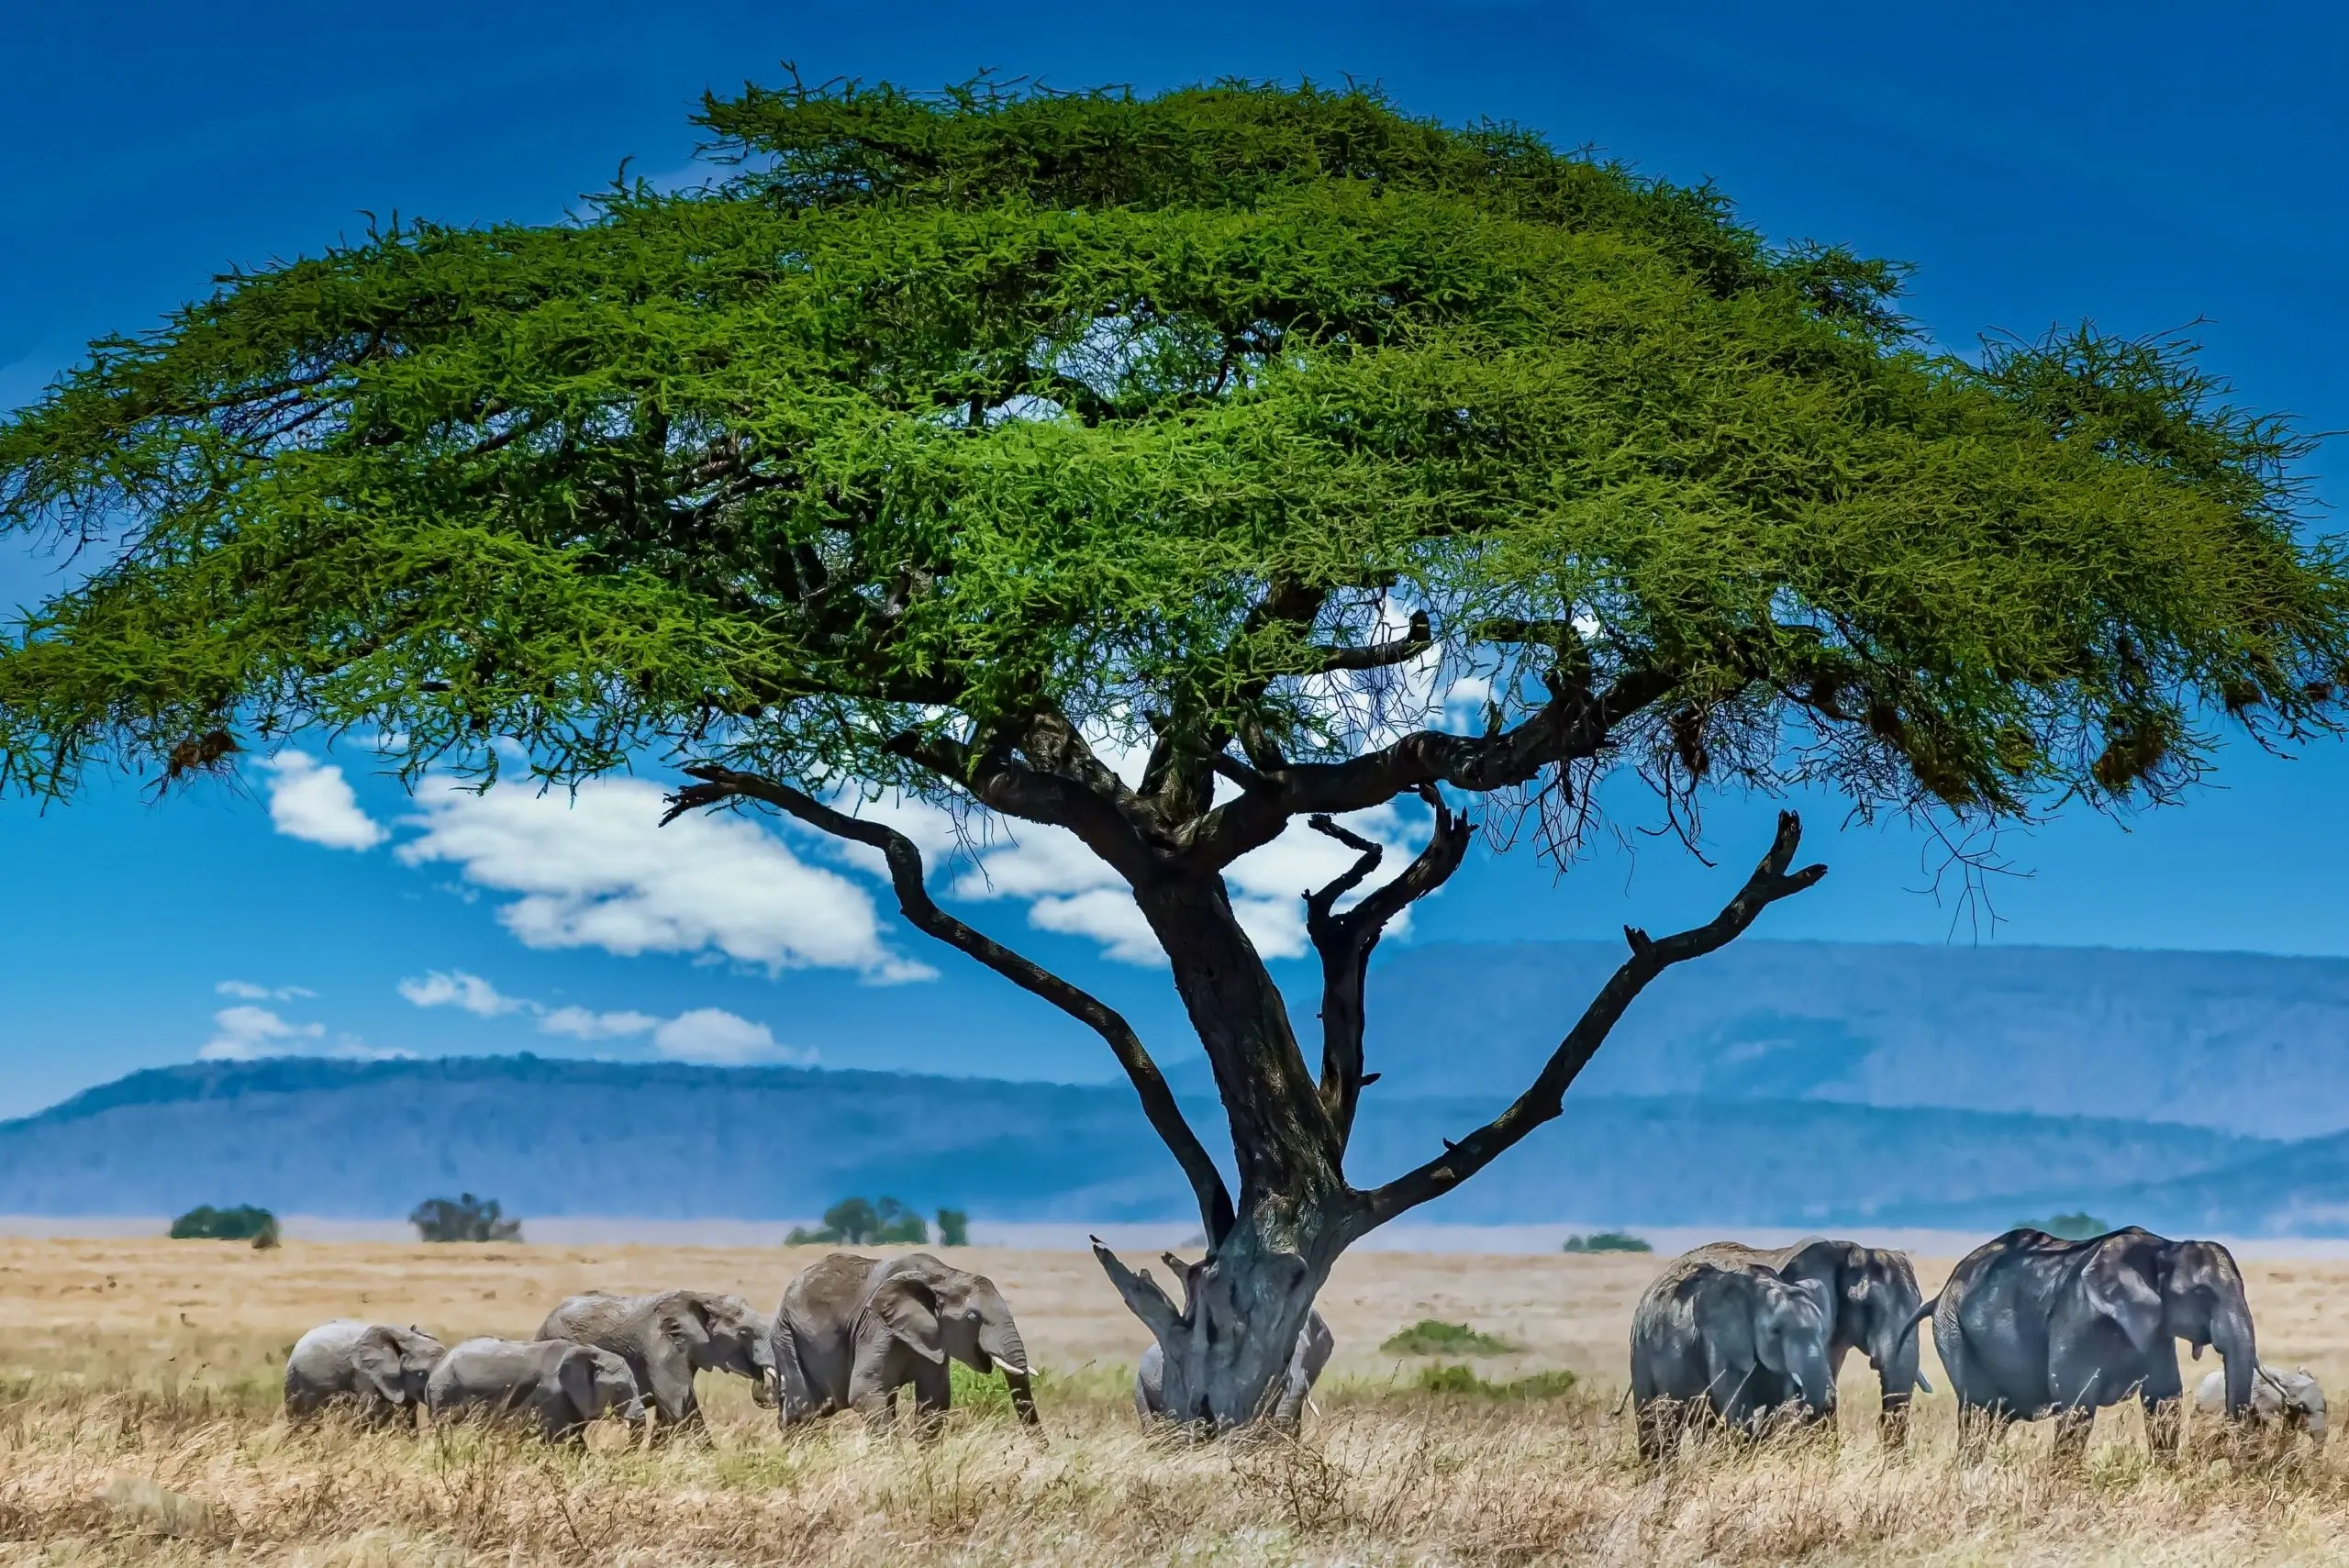 A group of elephants under a big green tree in the wilderness